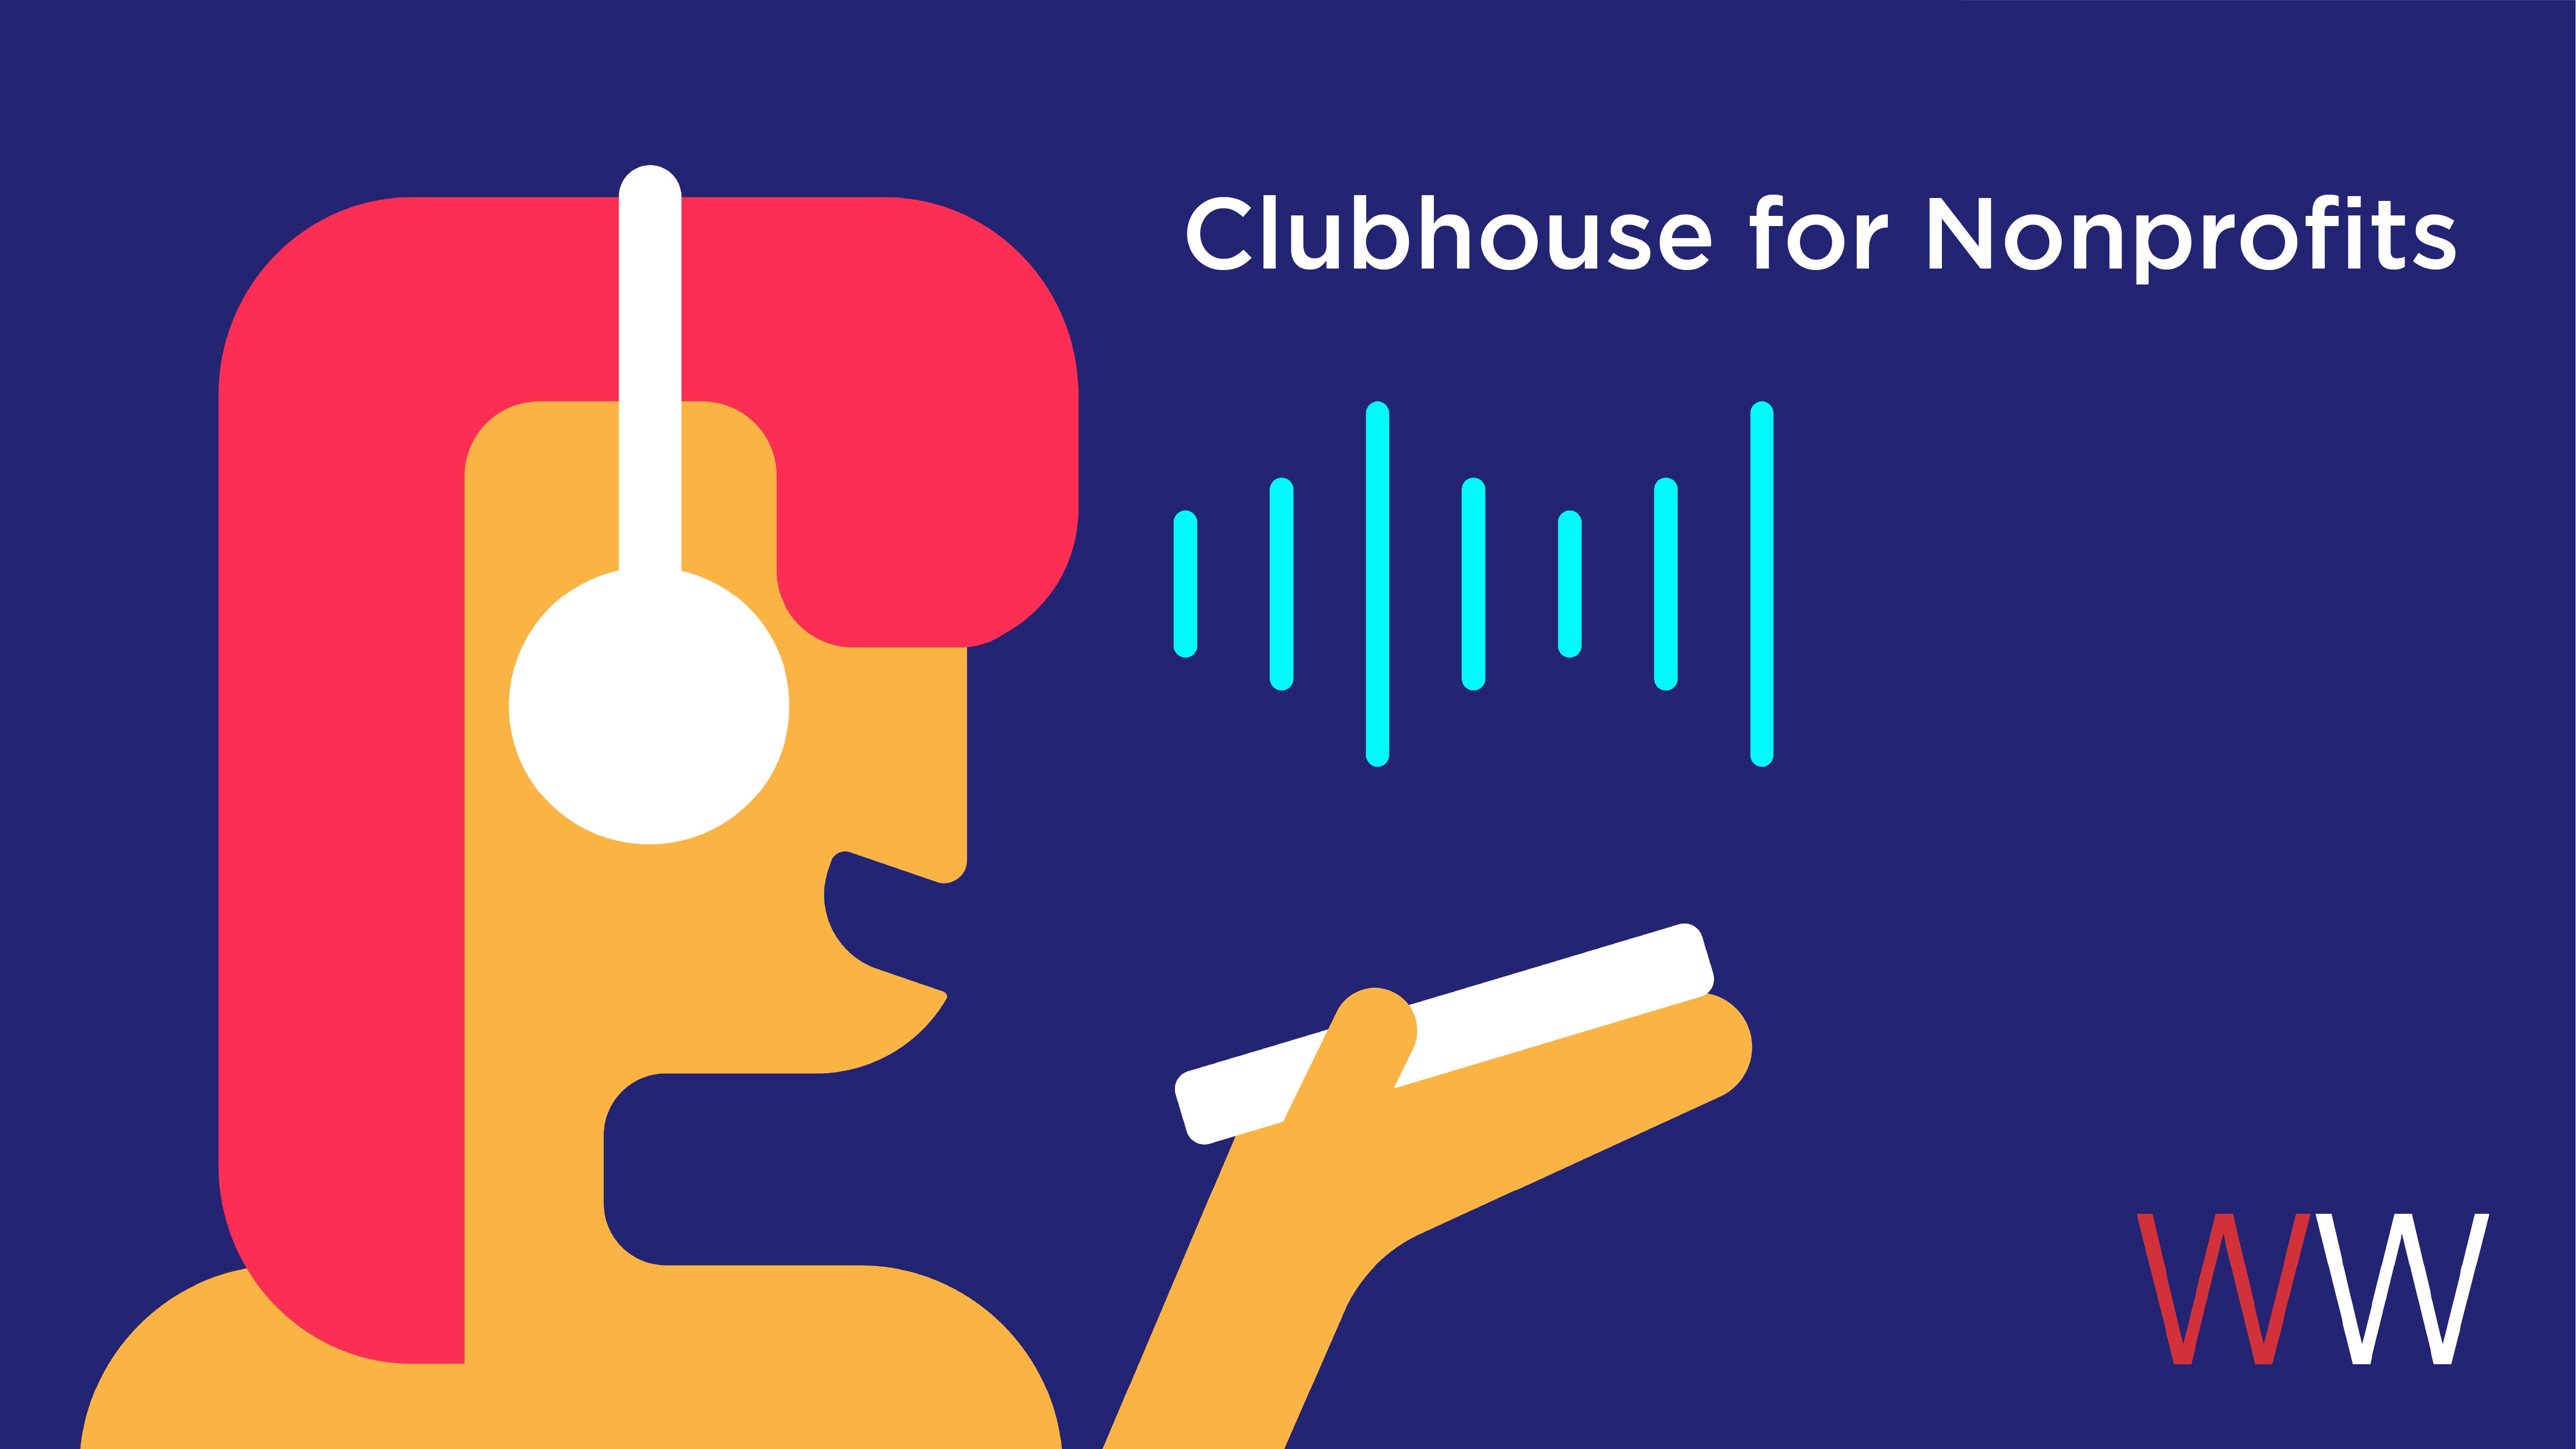 Clubhouse for Nonprofits